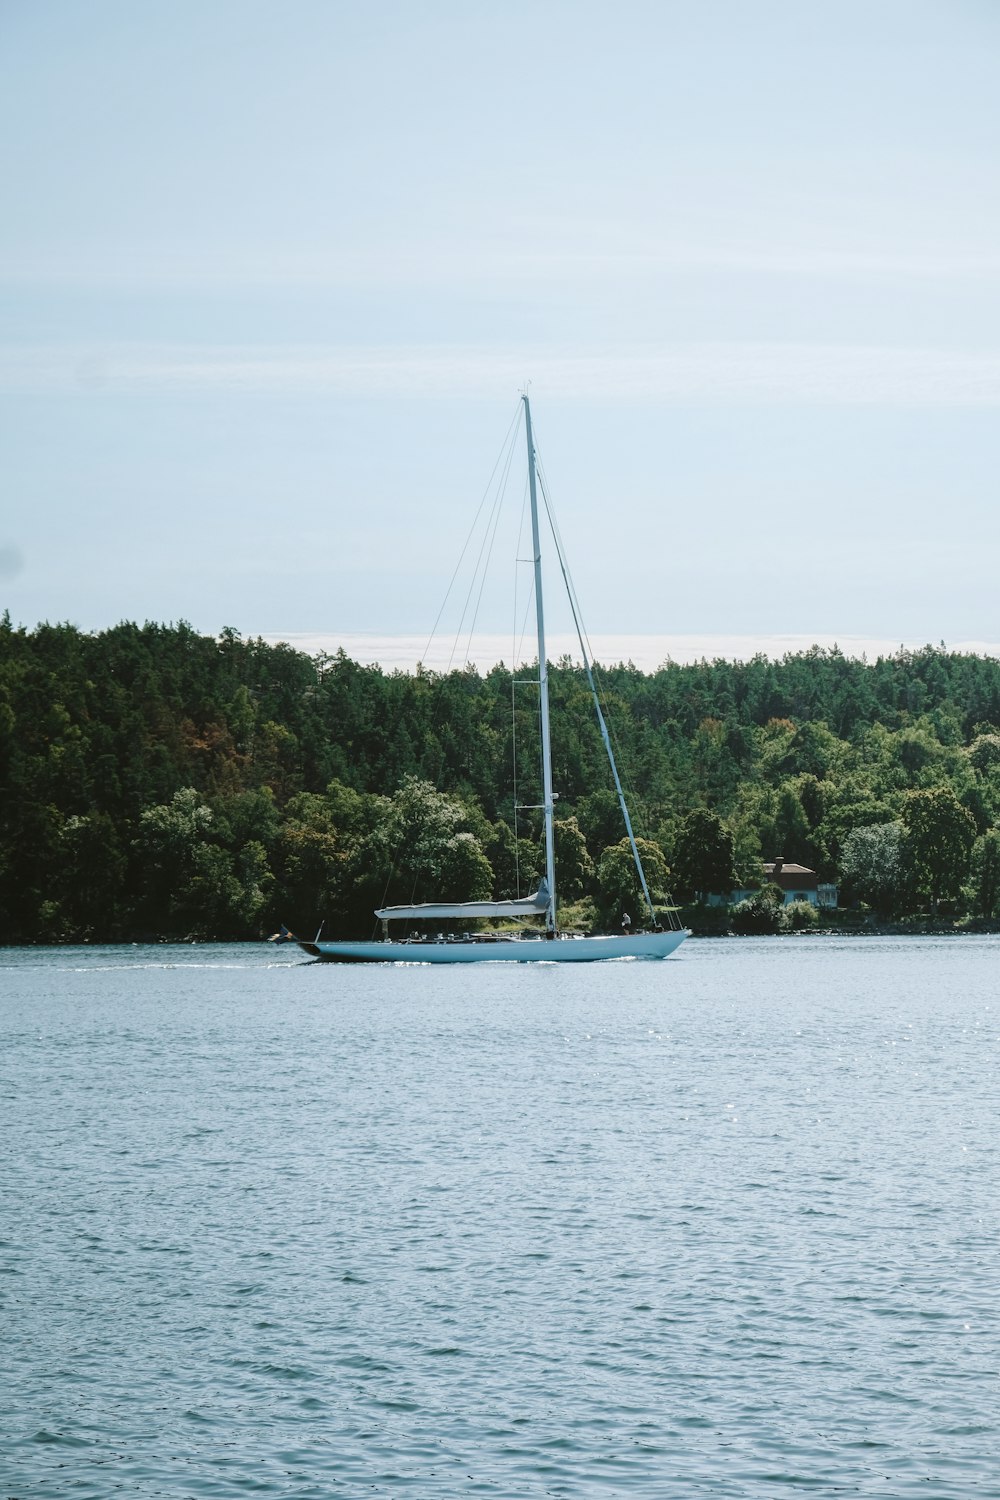 a sailboat on a lake with trees in the background